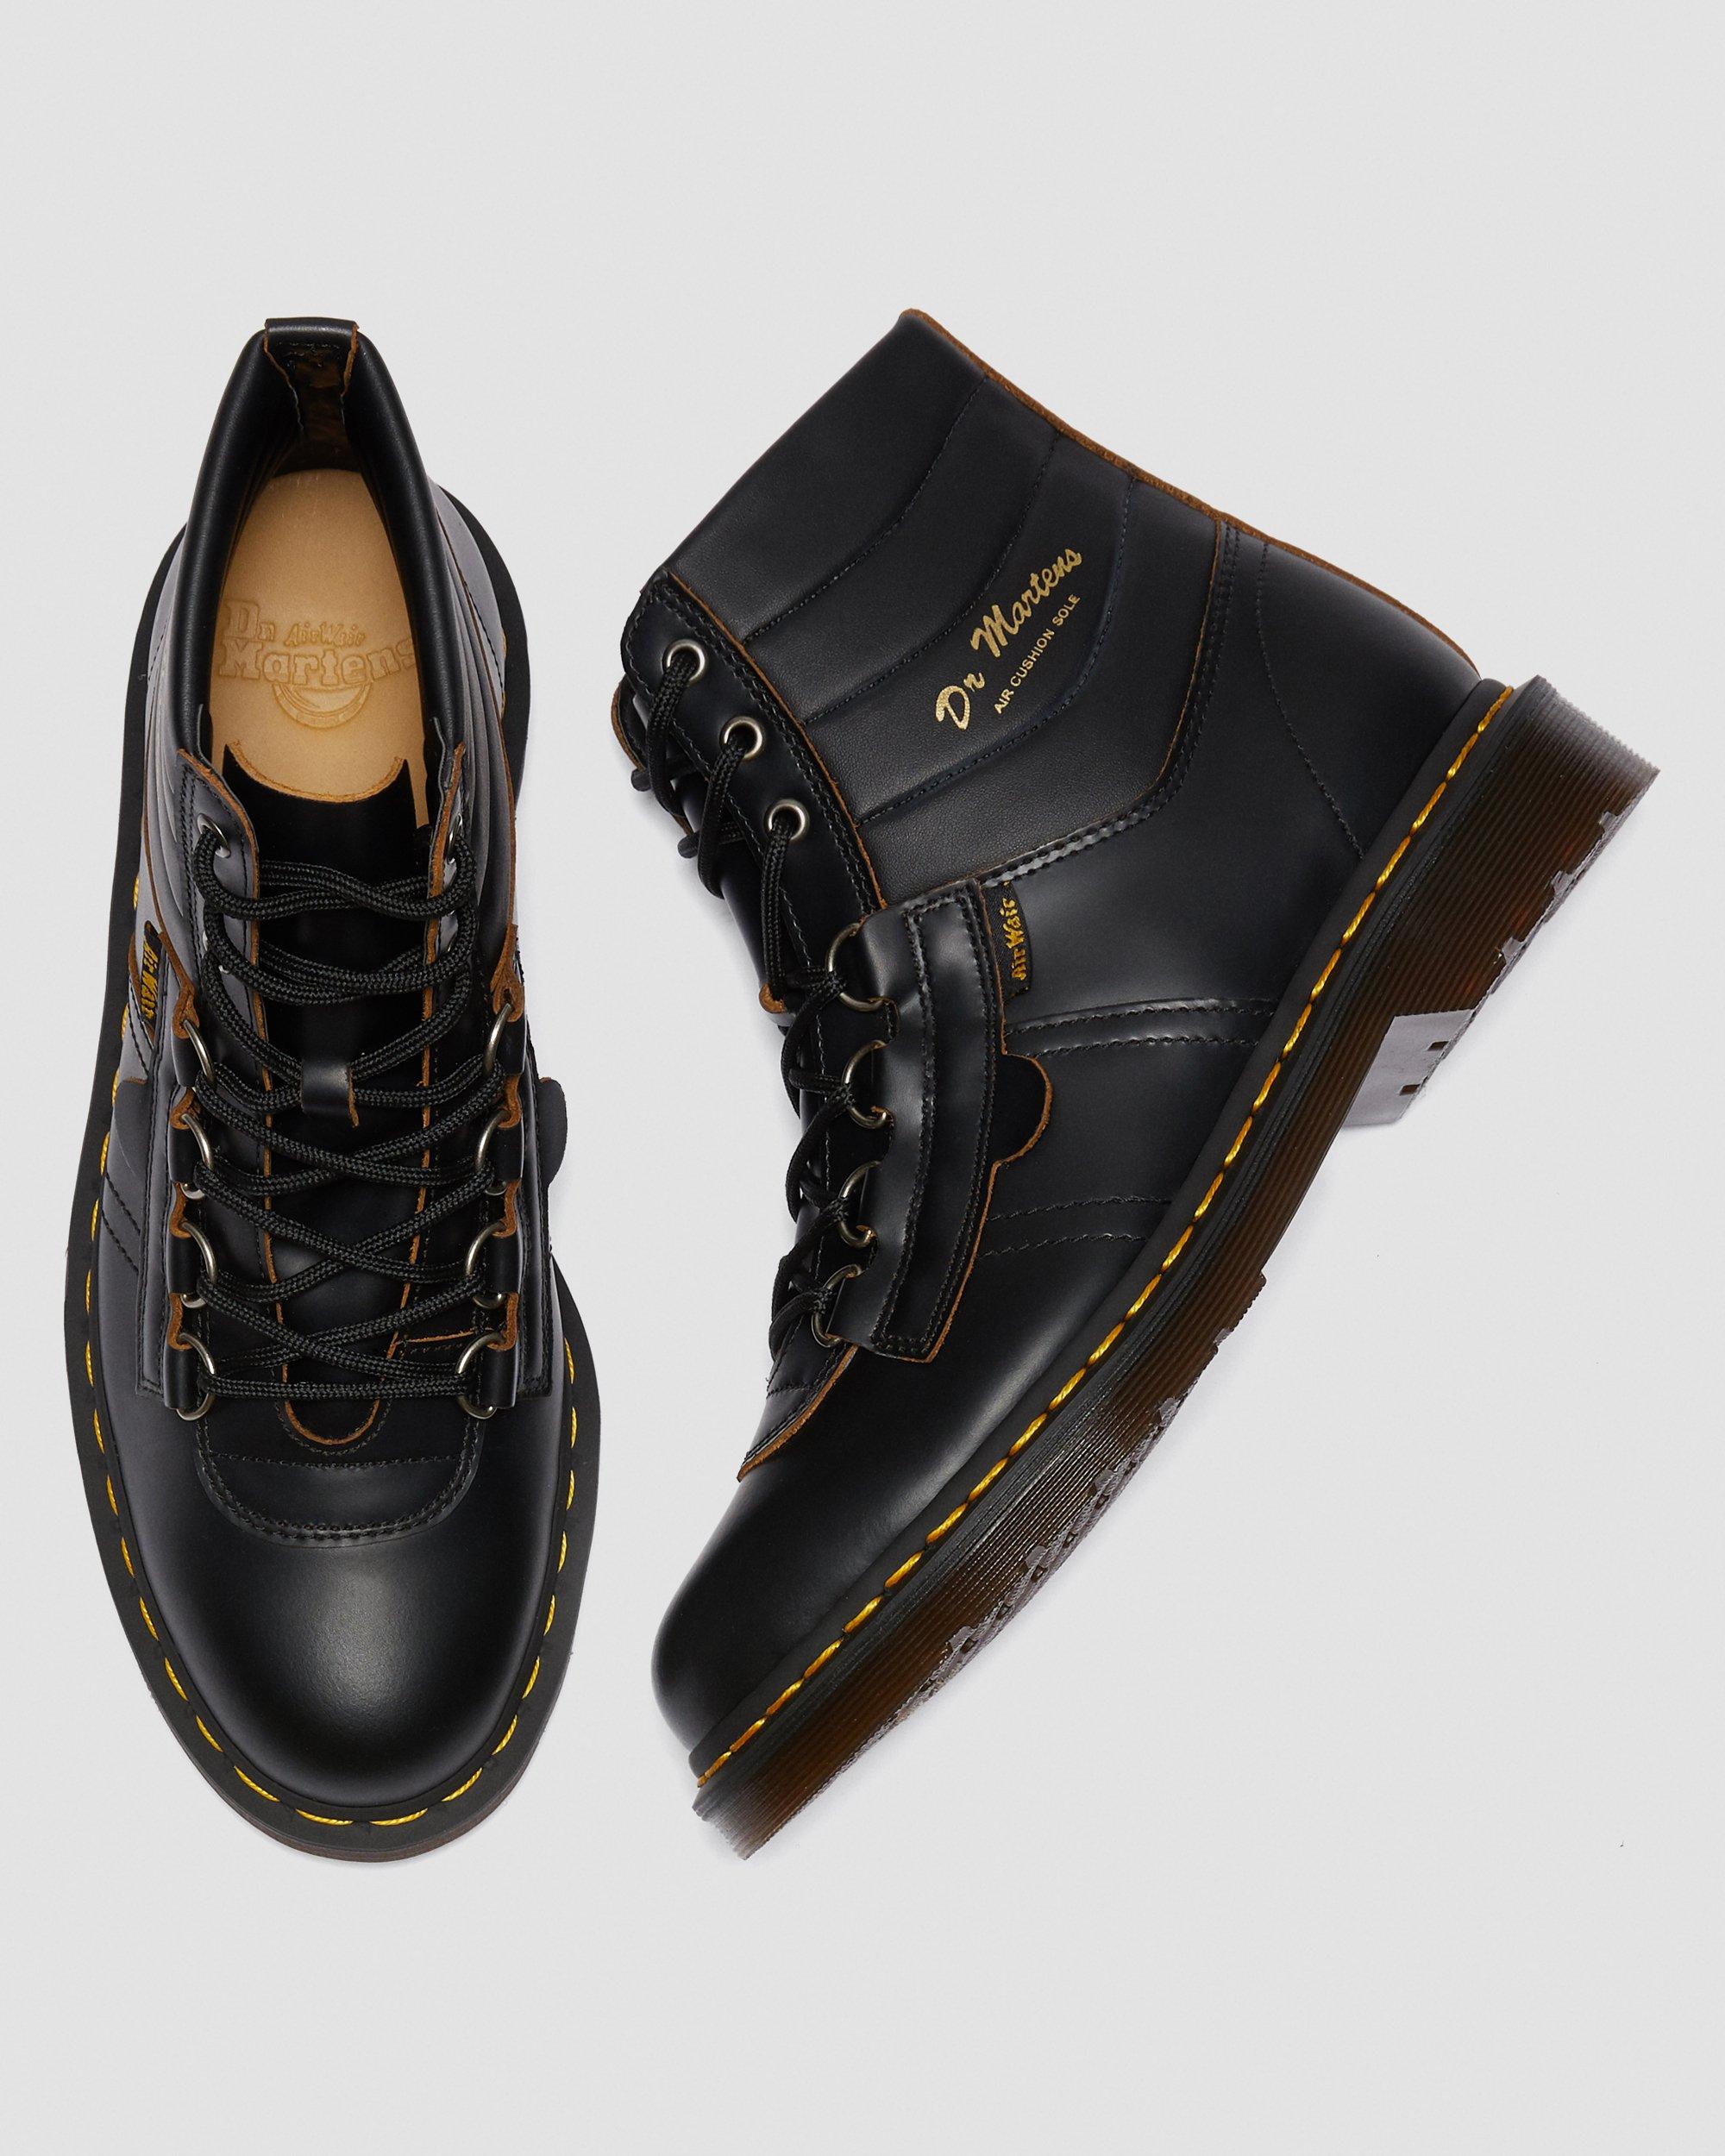 KAMIN ARCHIVE LACE UP LEATHER BOOTS Dr. Martens